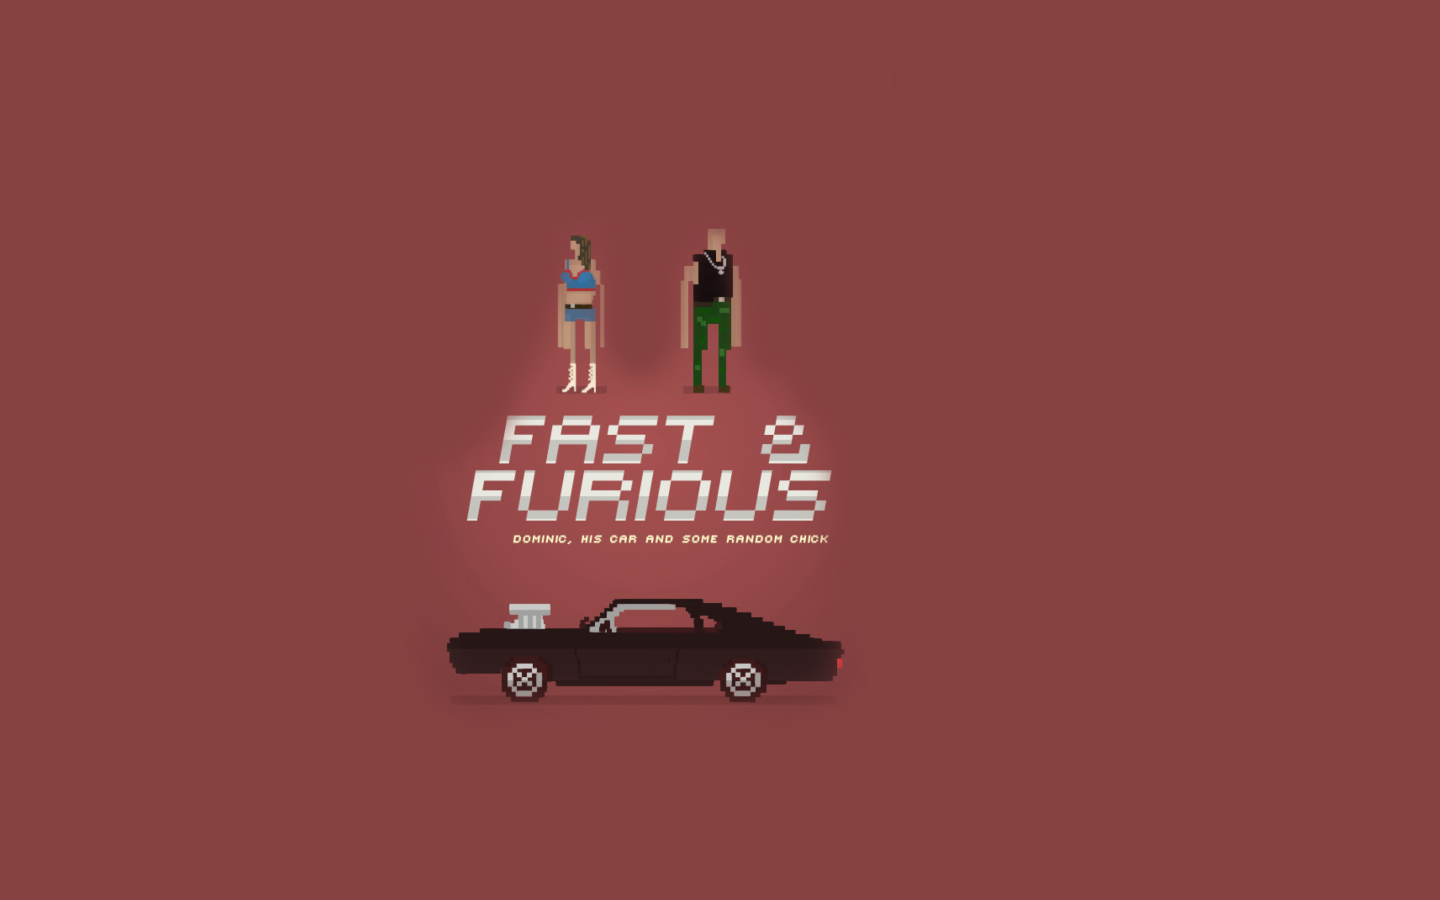 Fast And Furious wallpaper 1440x900